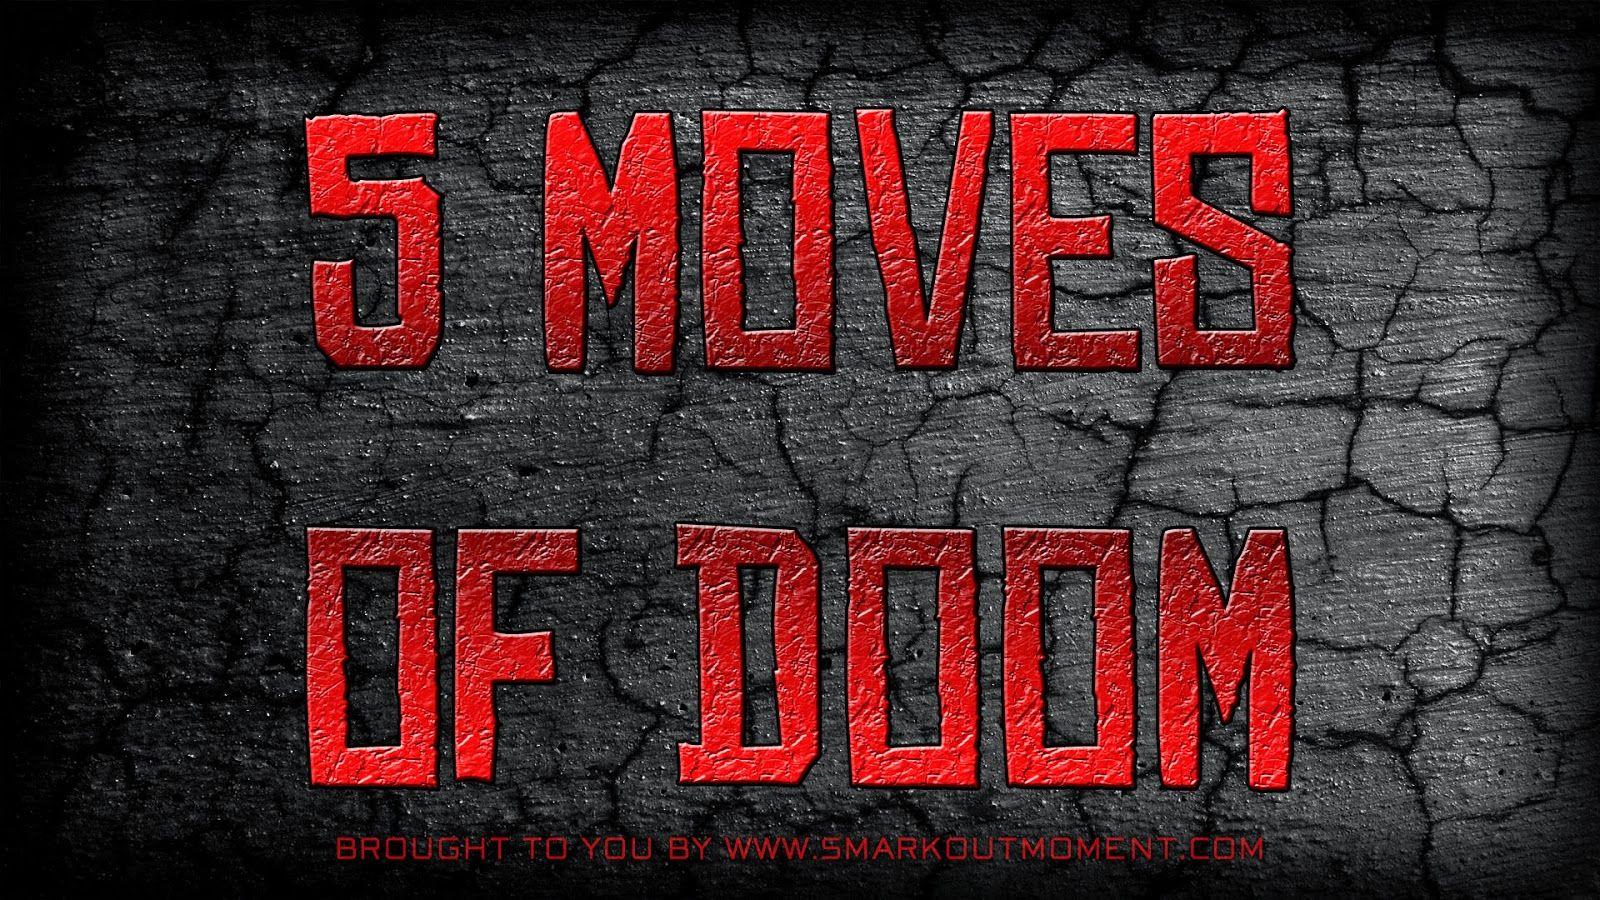 Five Moves of Doom: Randy Orton's Signature Moves and Finishers